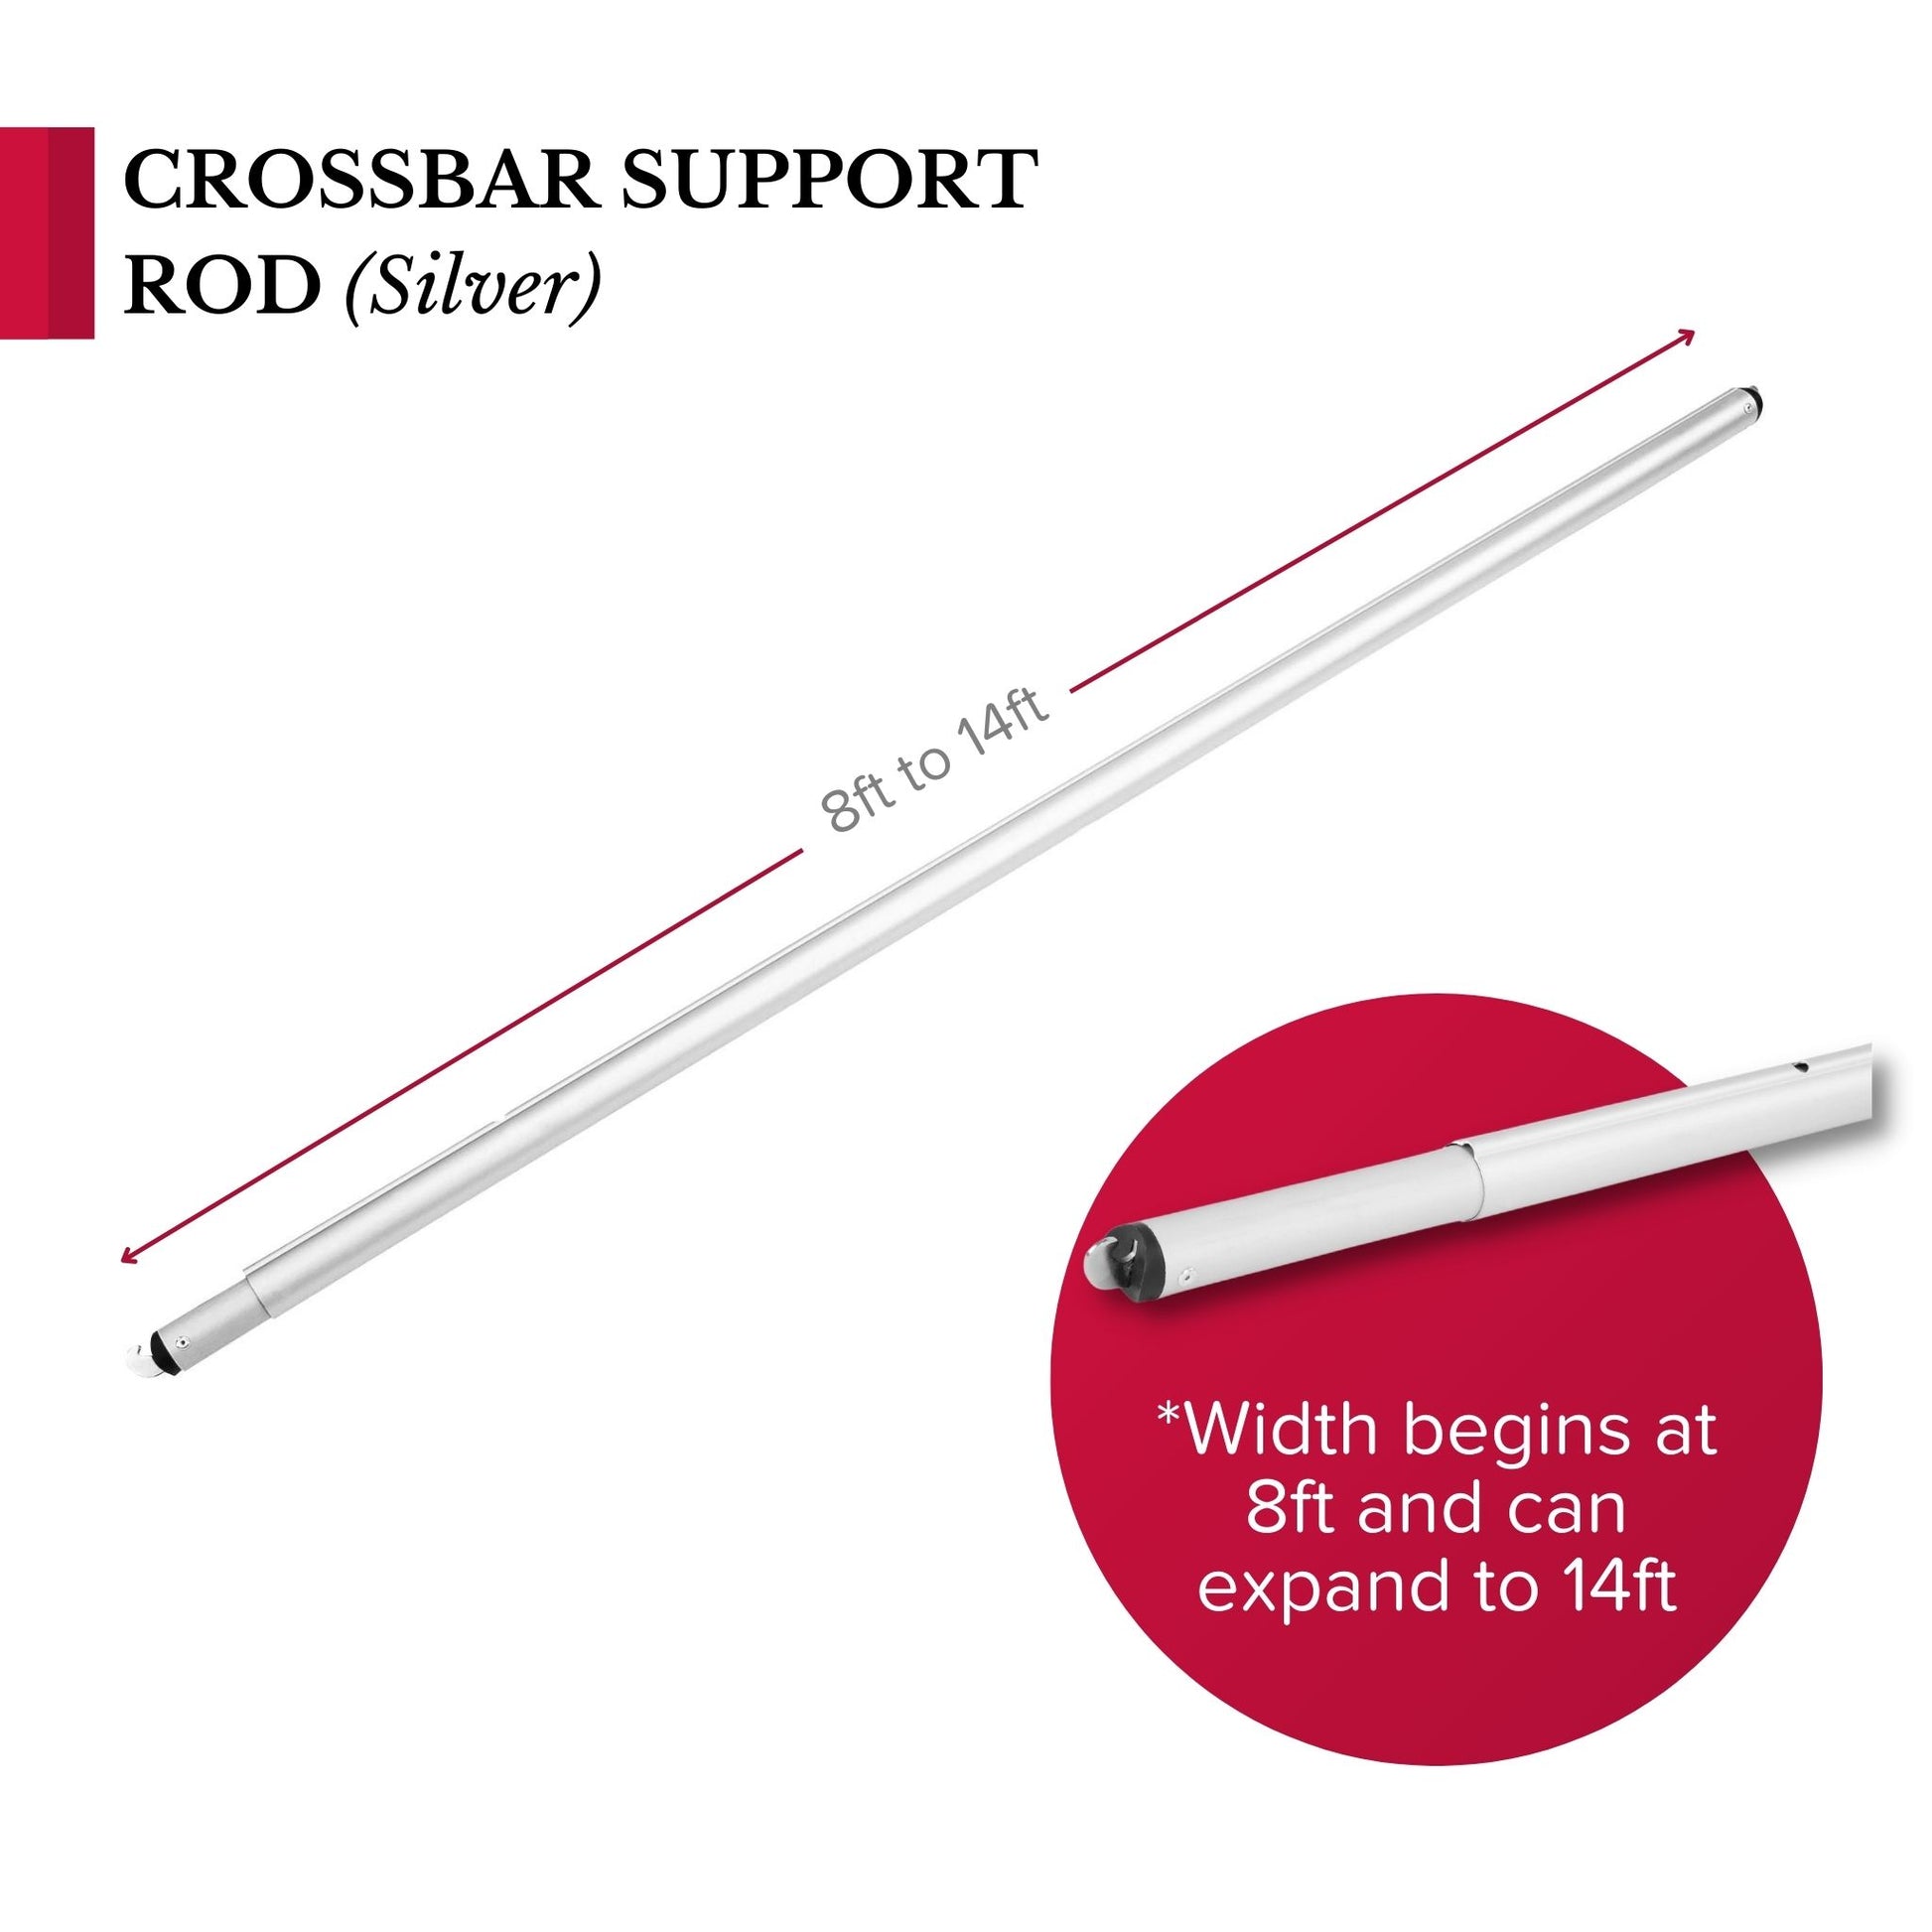 Crossbar support (drape support) rod 8ft to 14ft